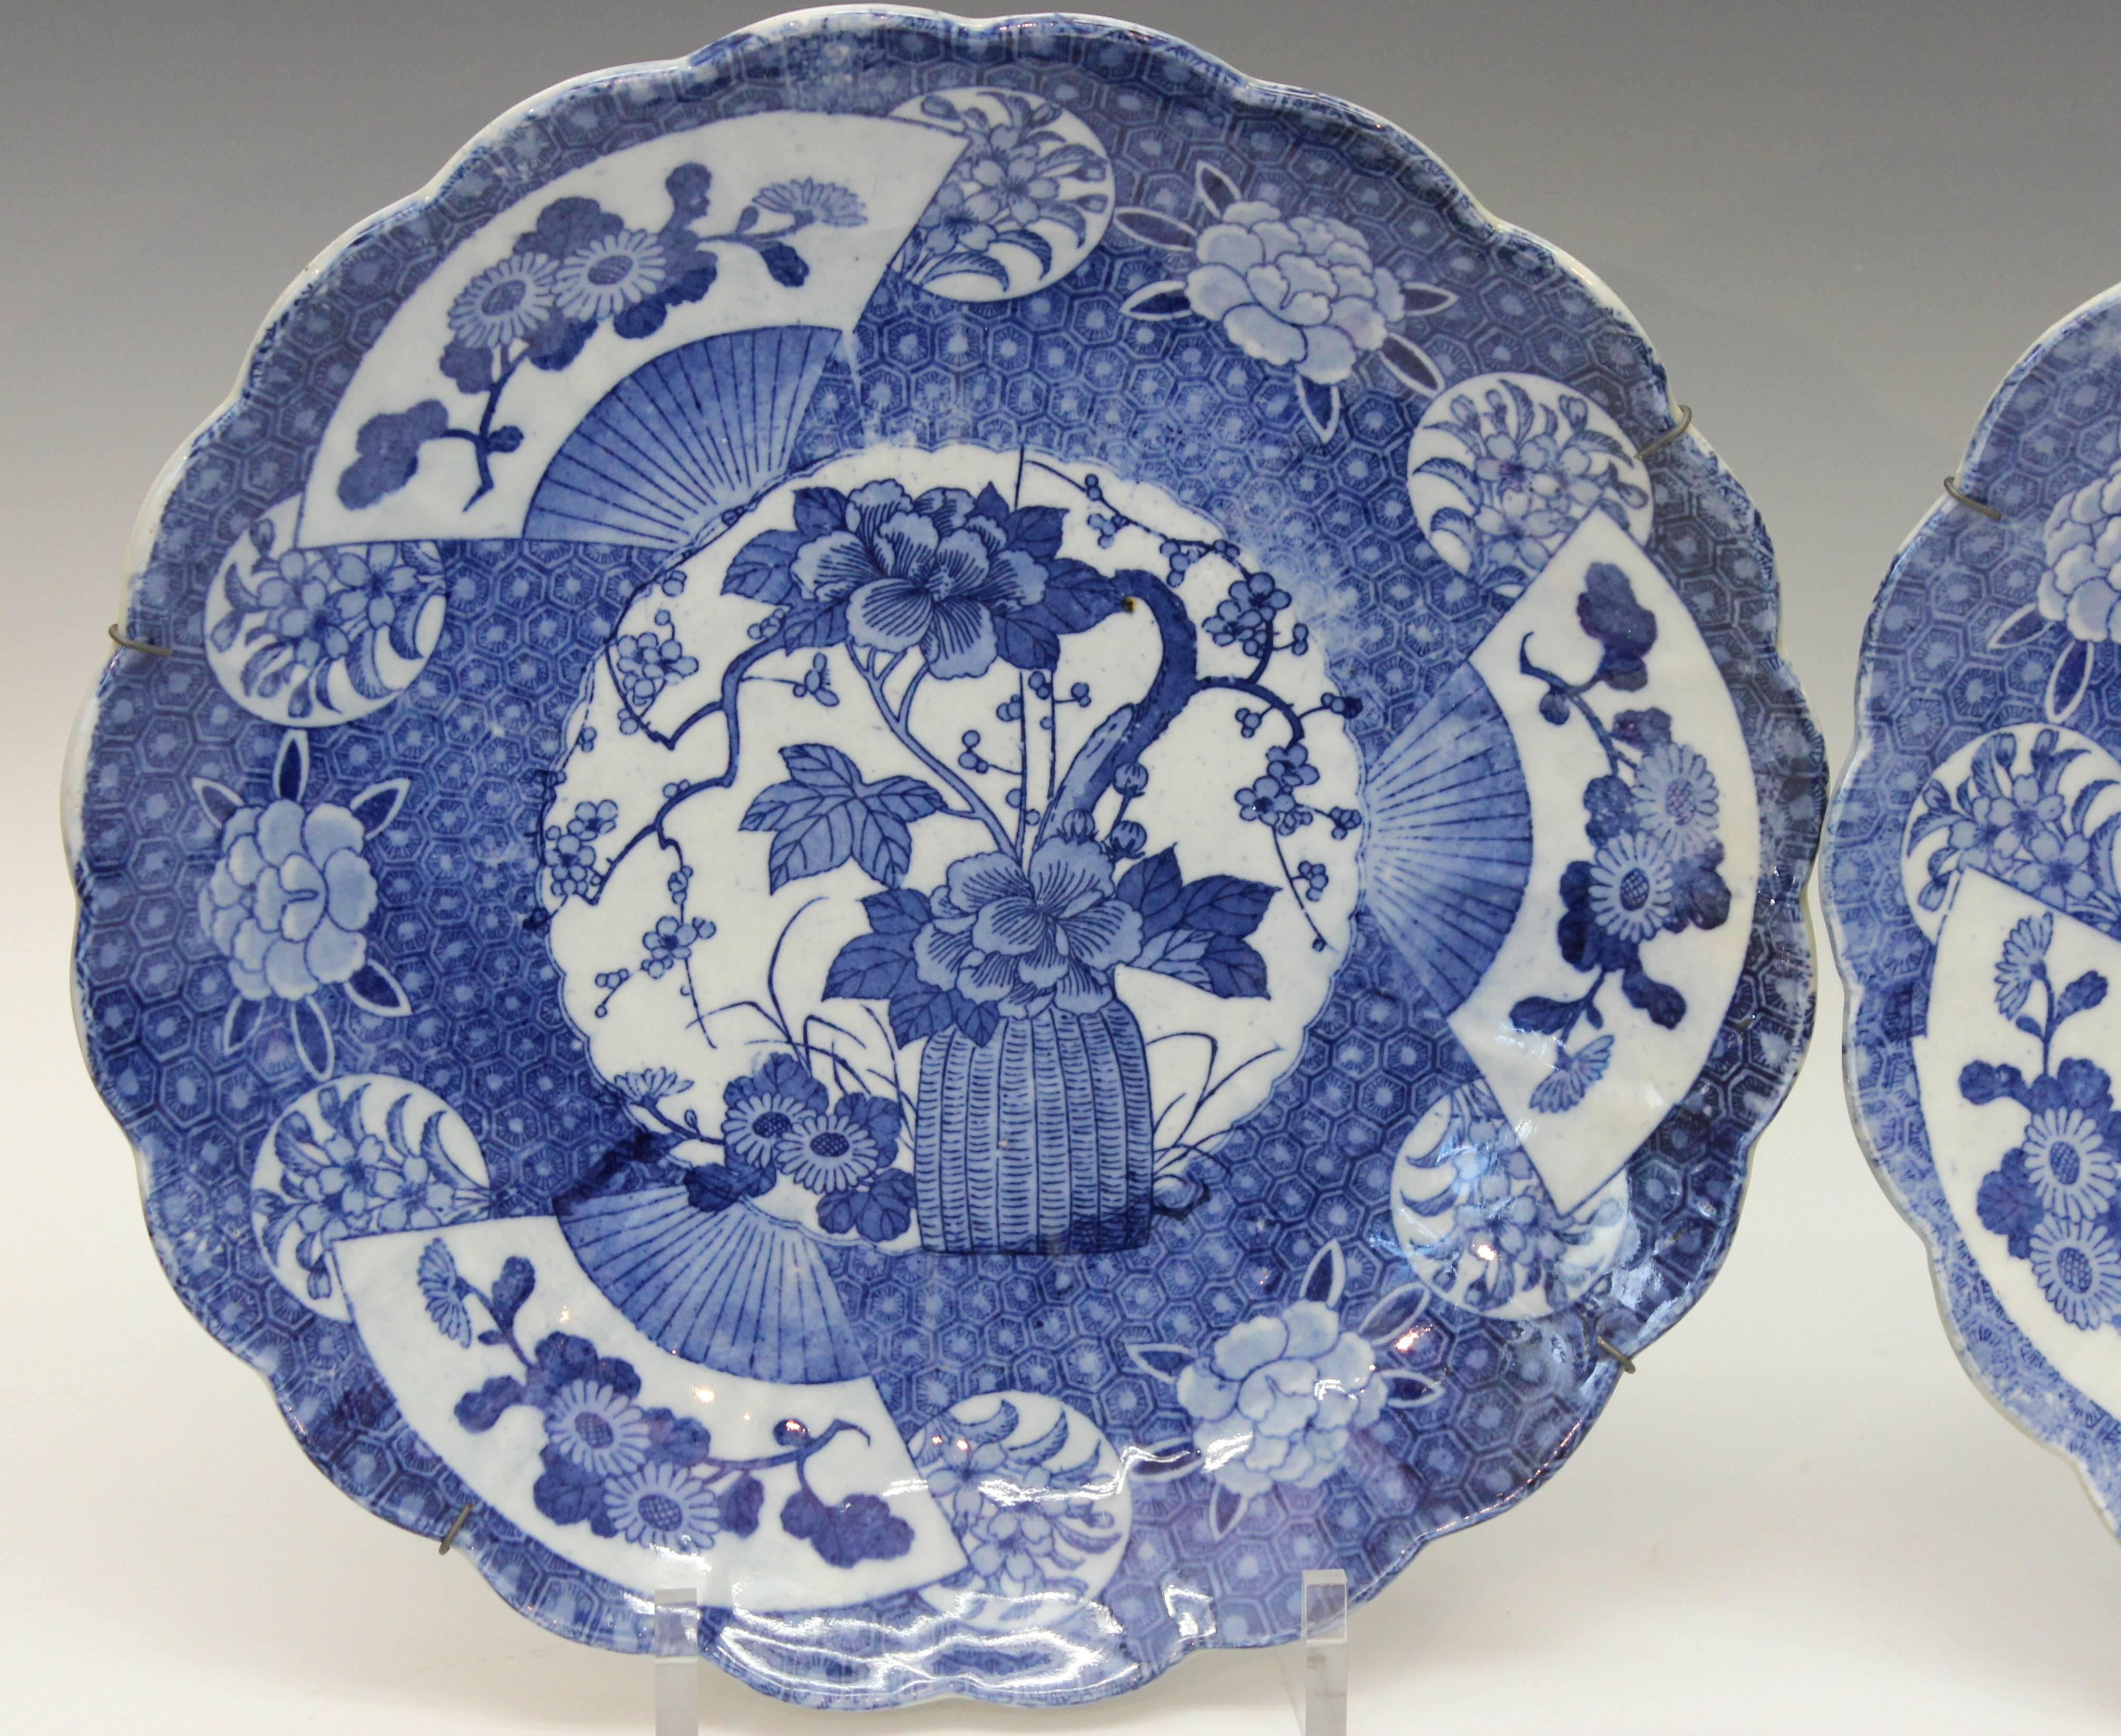 Pair Japanese porcelain chargers with foliated rims decorated with blue and white transfer designs, circa 1890's. With wire hangers. 14 1/2